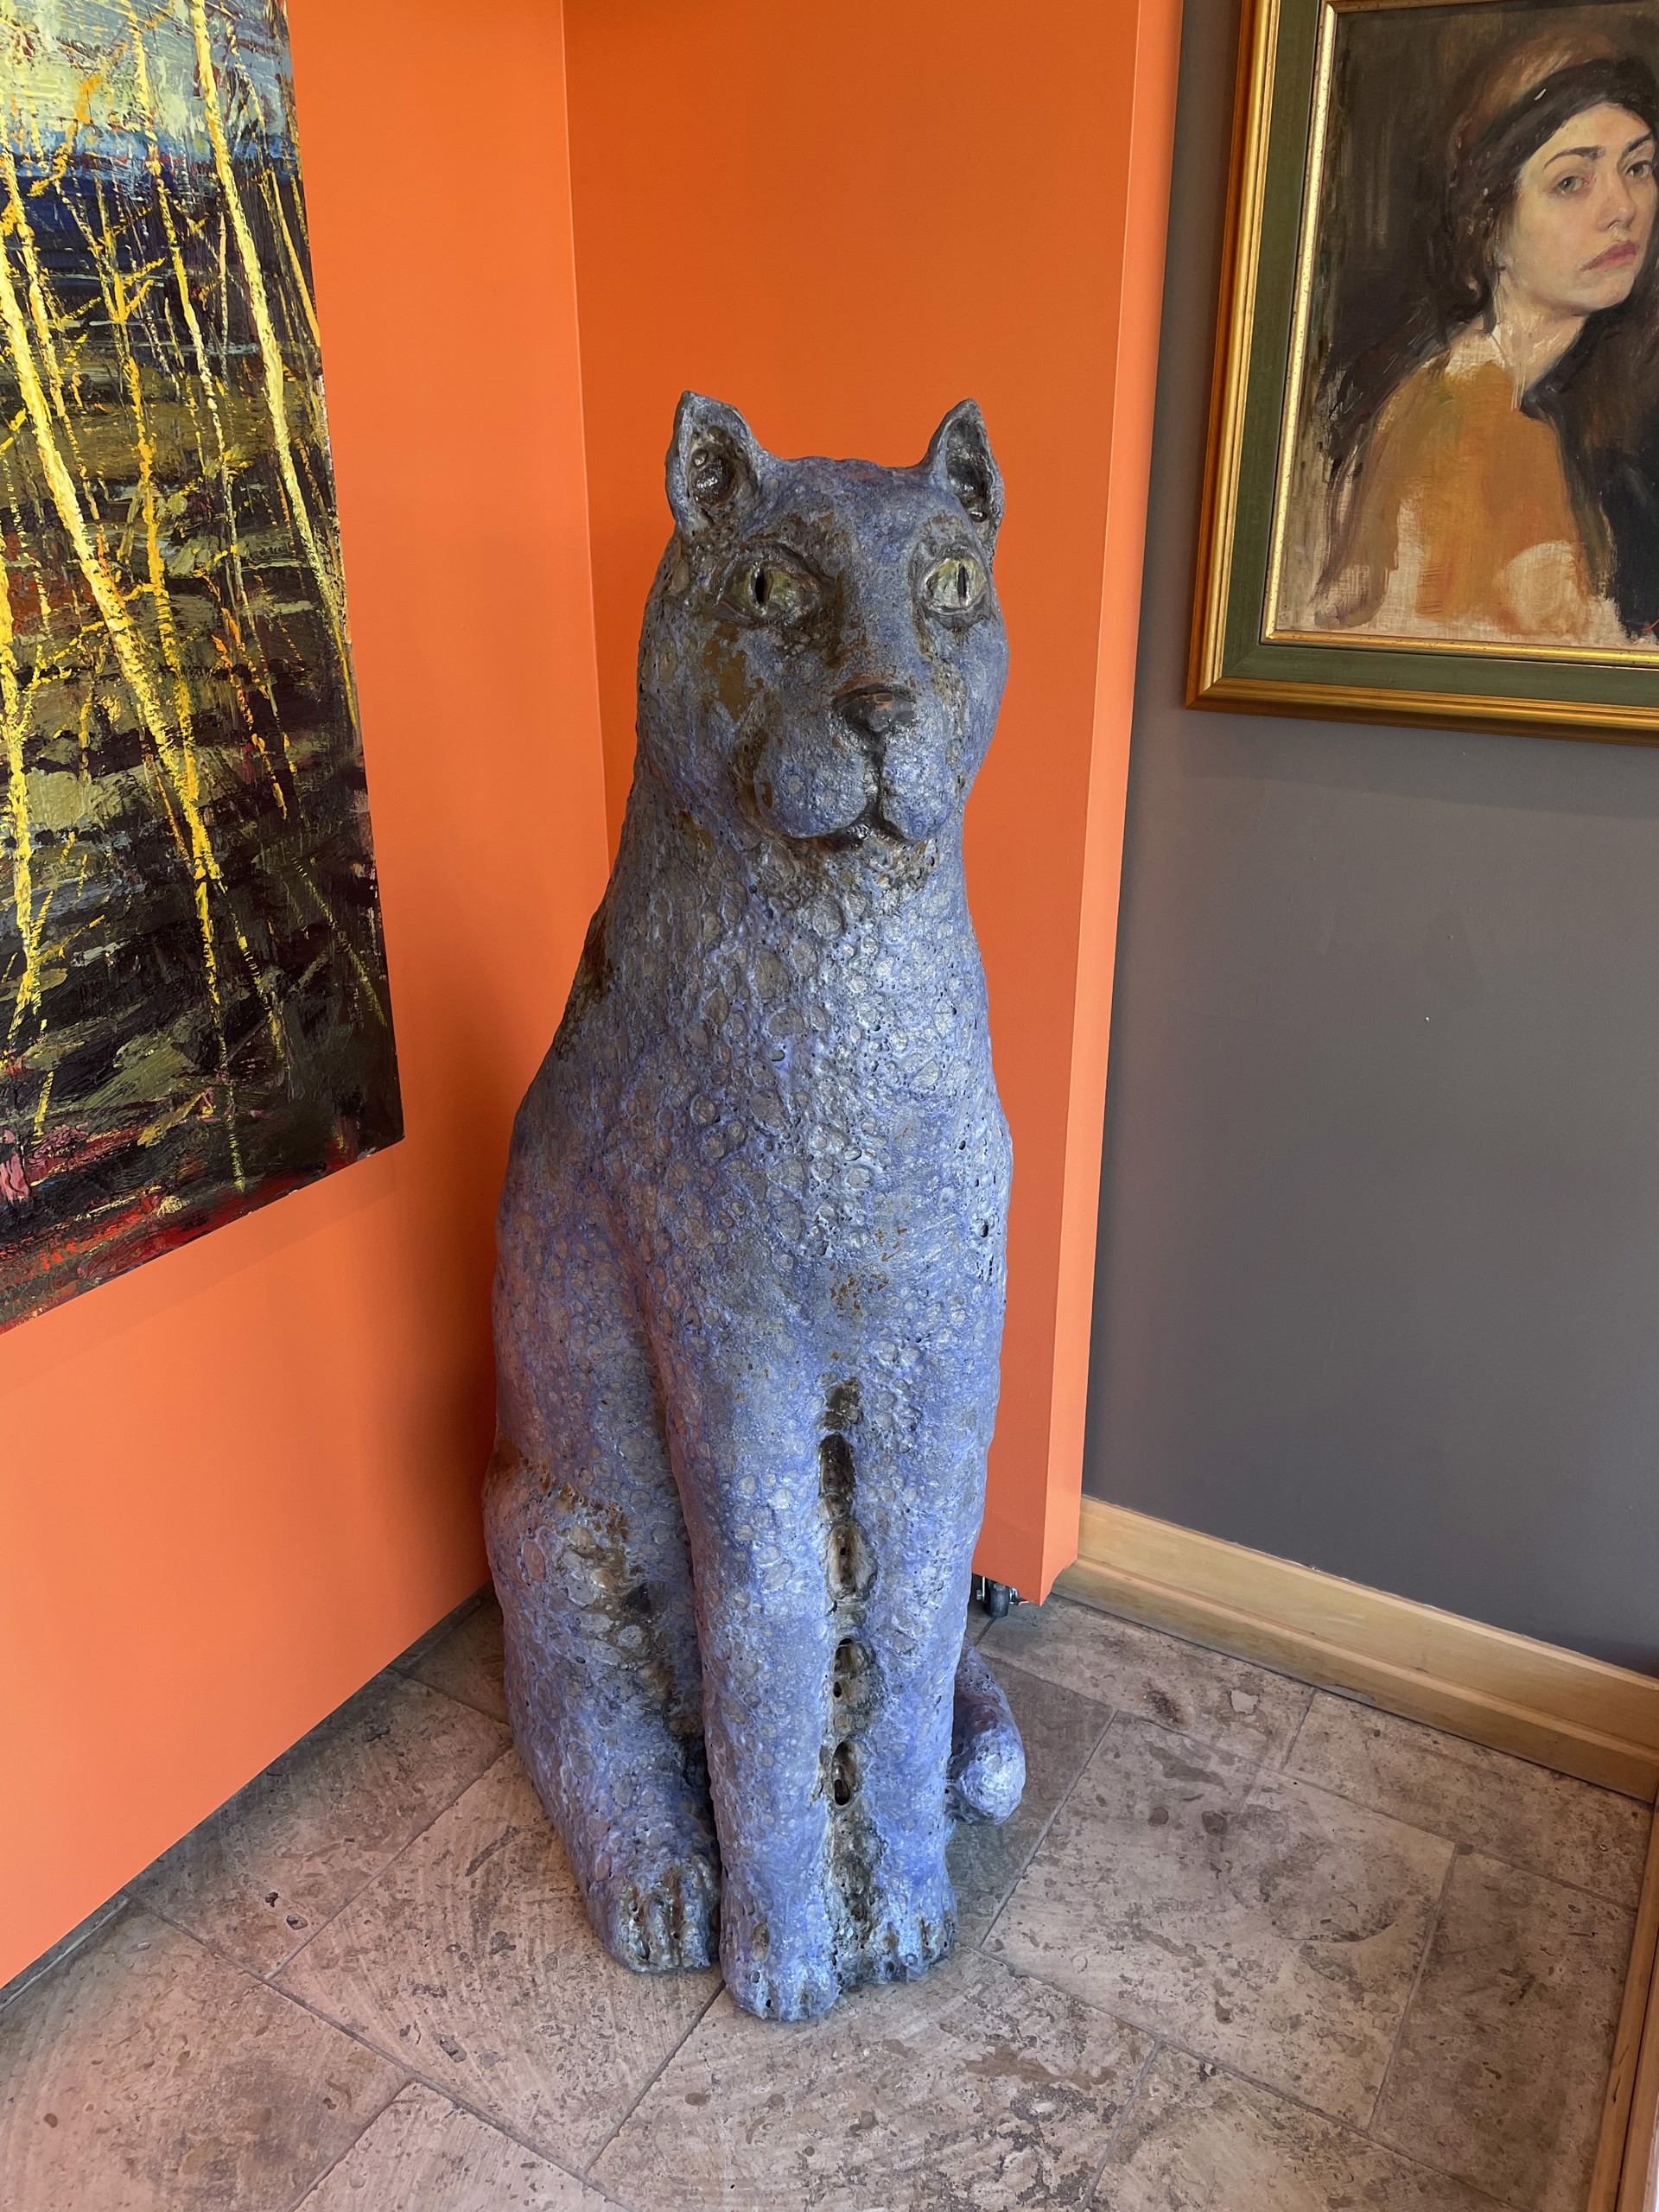 Big Blue Cat by Mark Chatterley